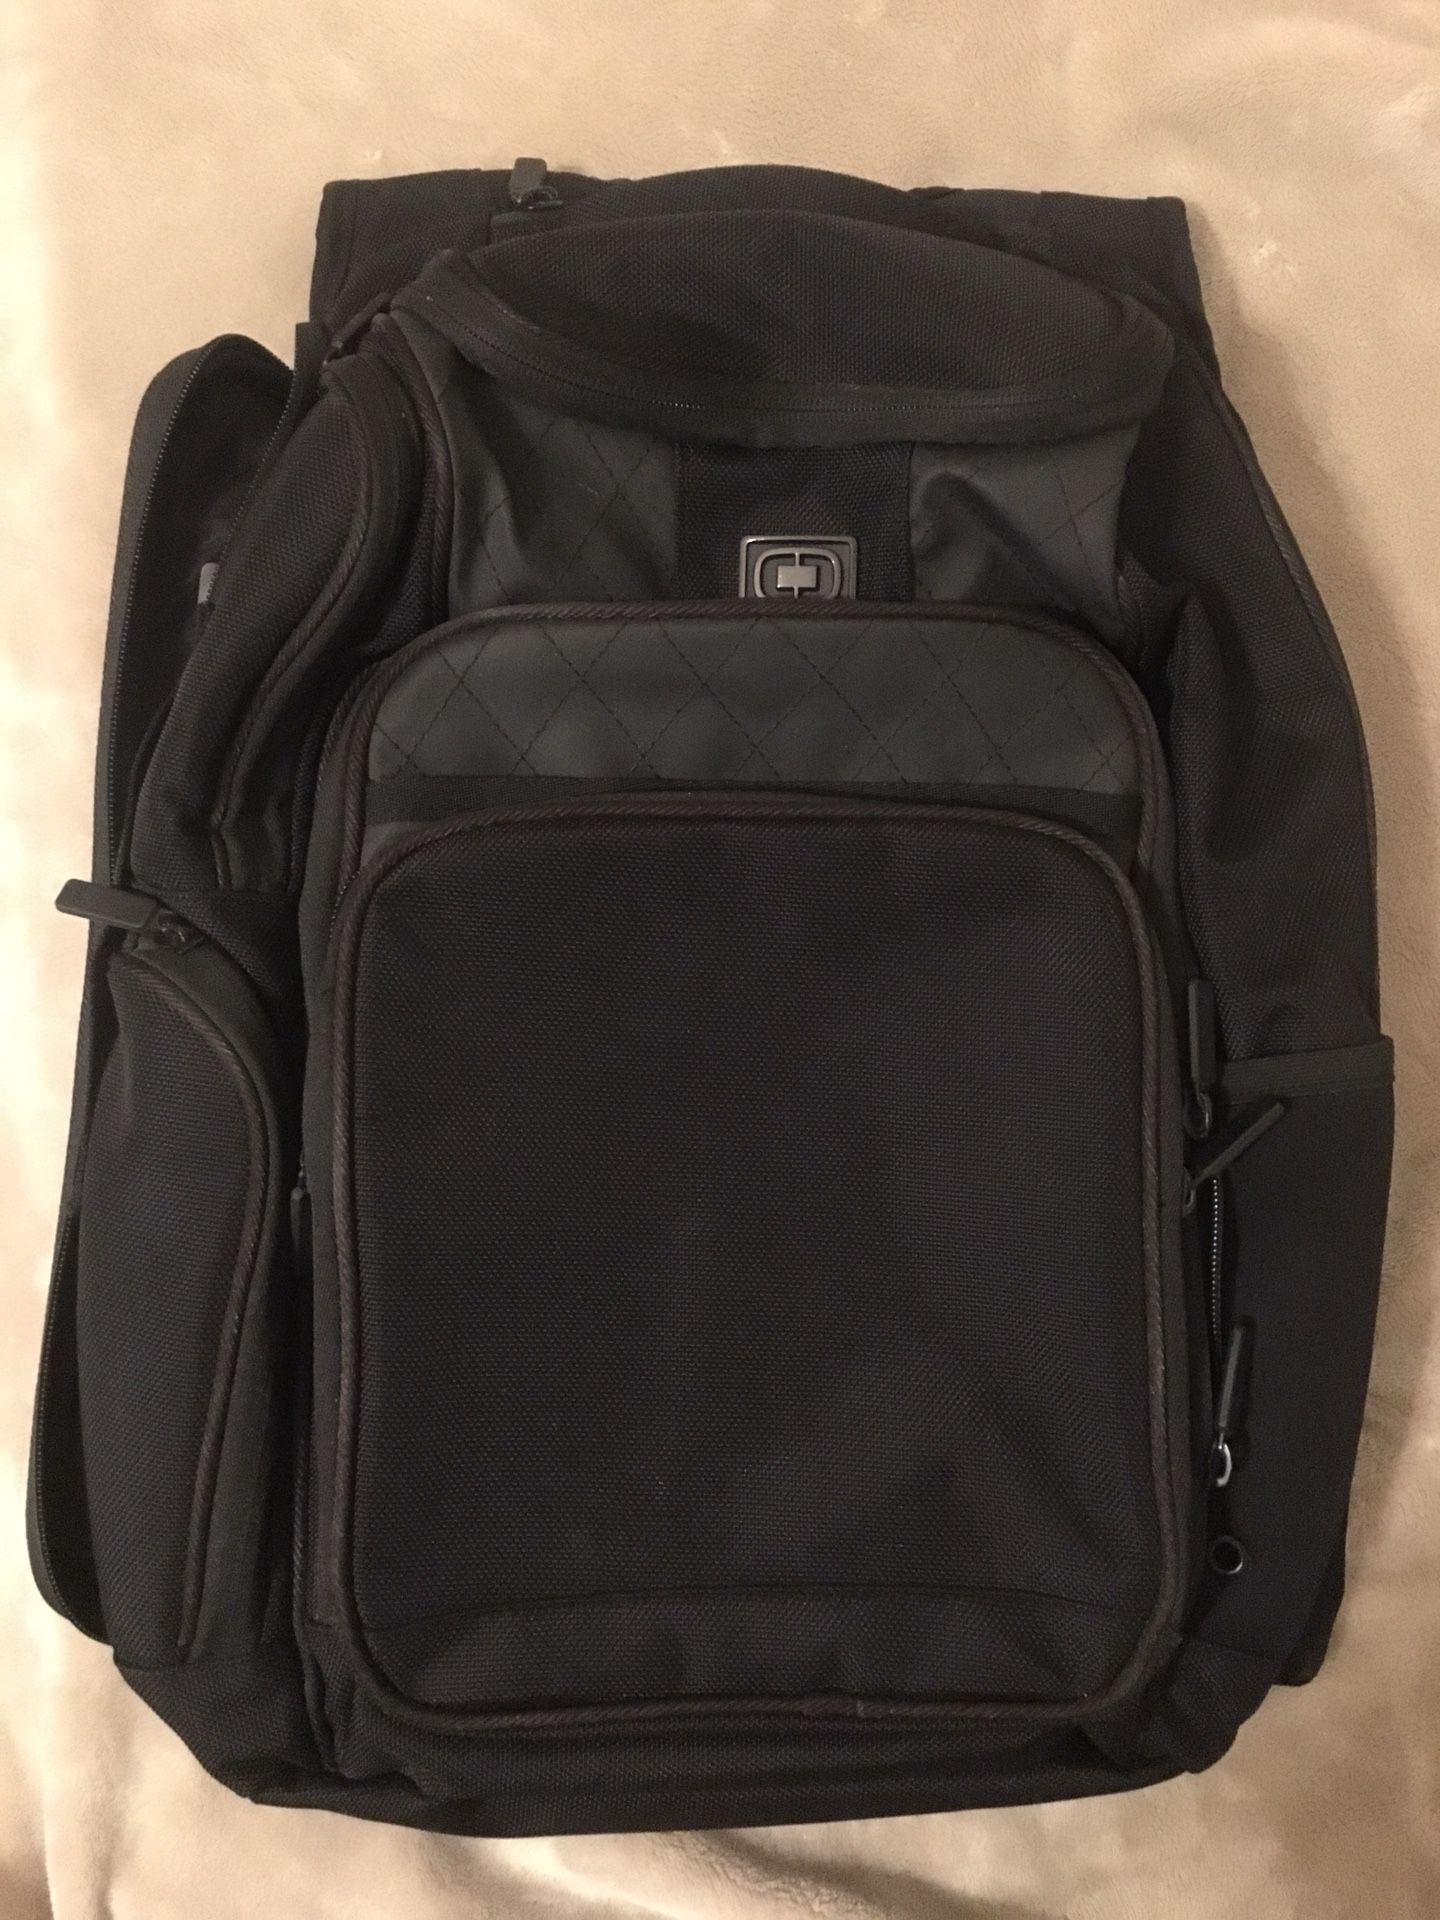 Ogio Backpack. This model features LPS (Laptop Protection System) and AFS (Air Flow System). Has lots of compartments. Black in color.